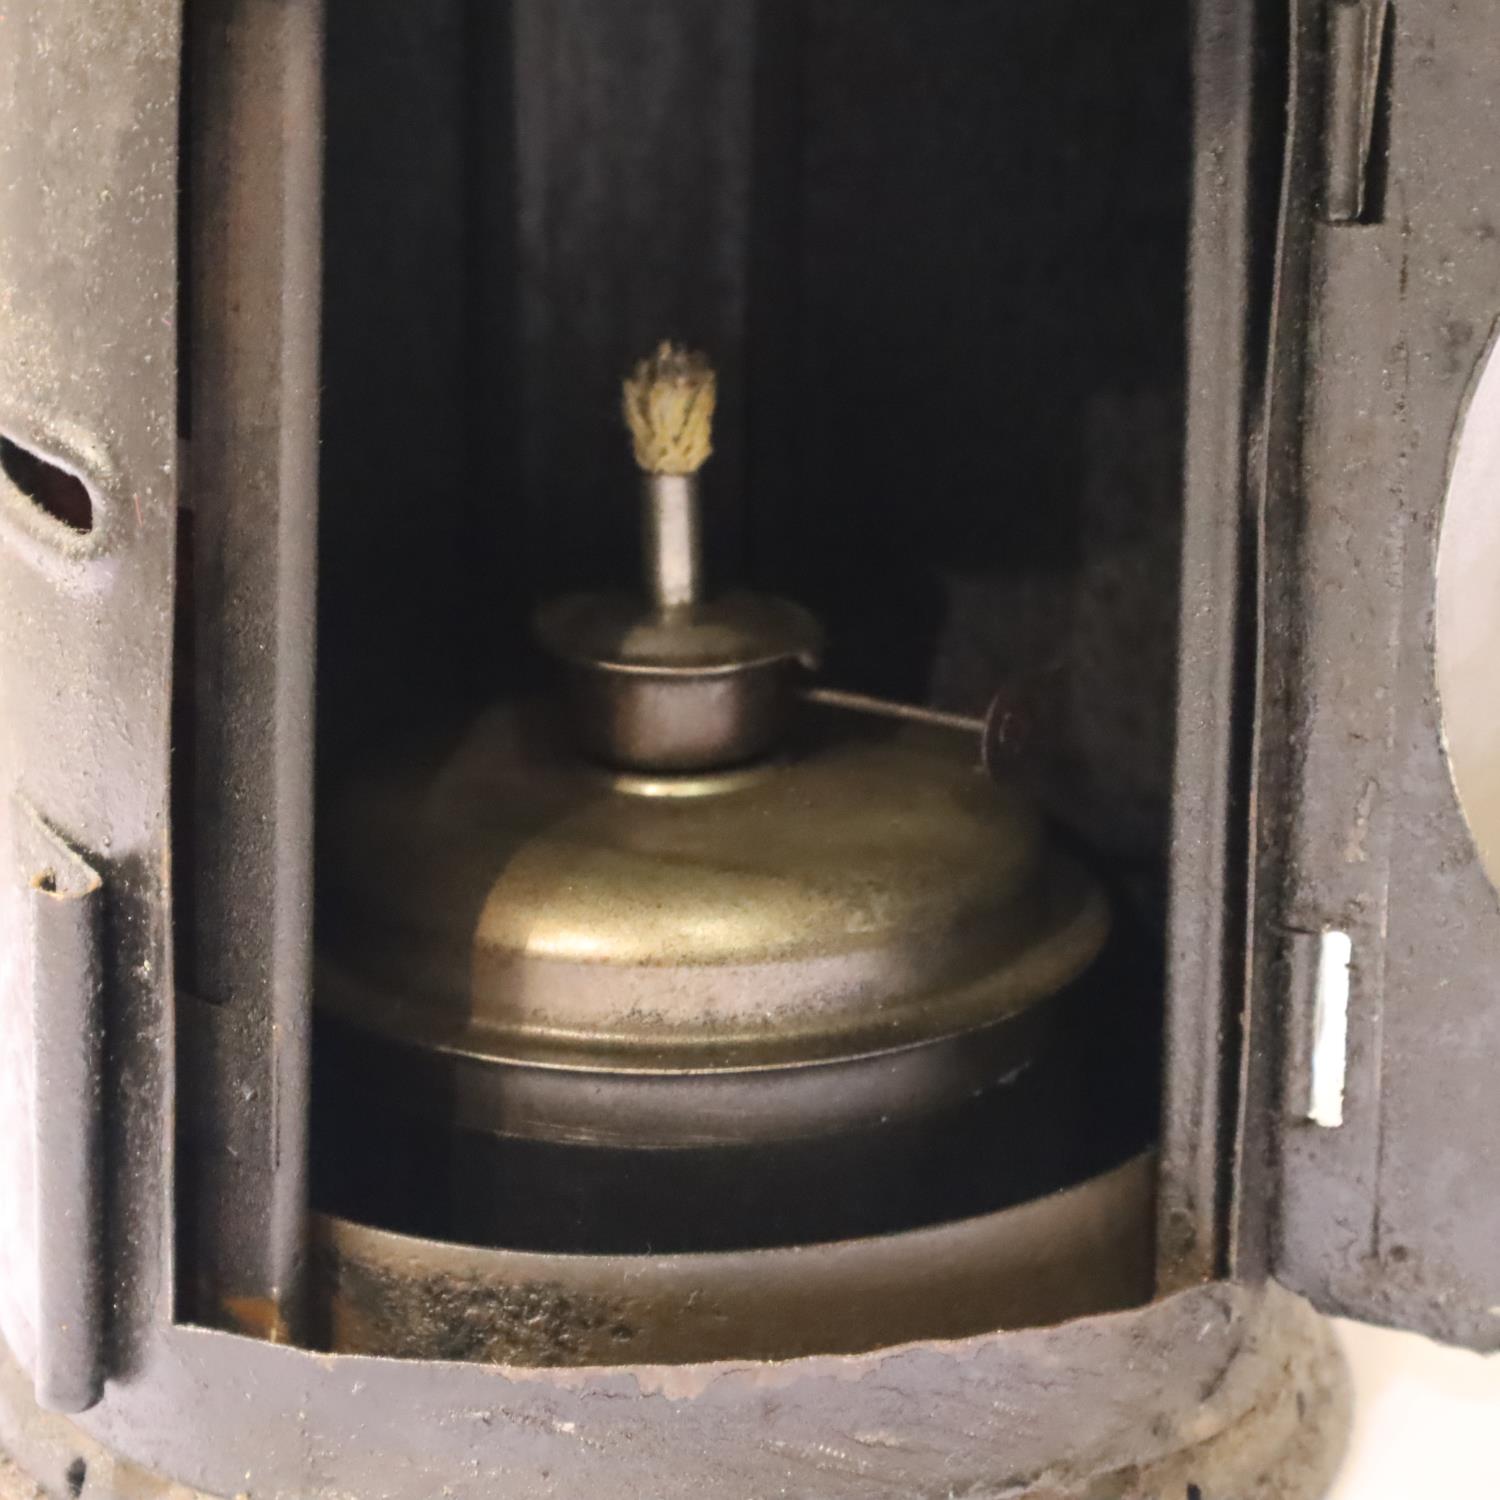 Vintage railway lantern with burner. Not available for in-house P&P, contact Paul O'Hea at Mailboxes - Image 2 of 2